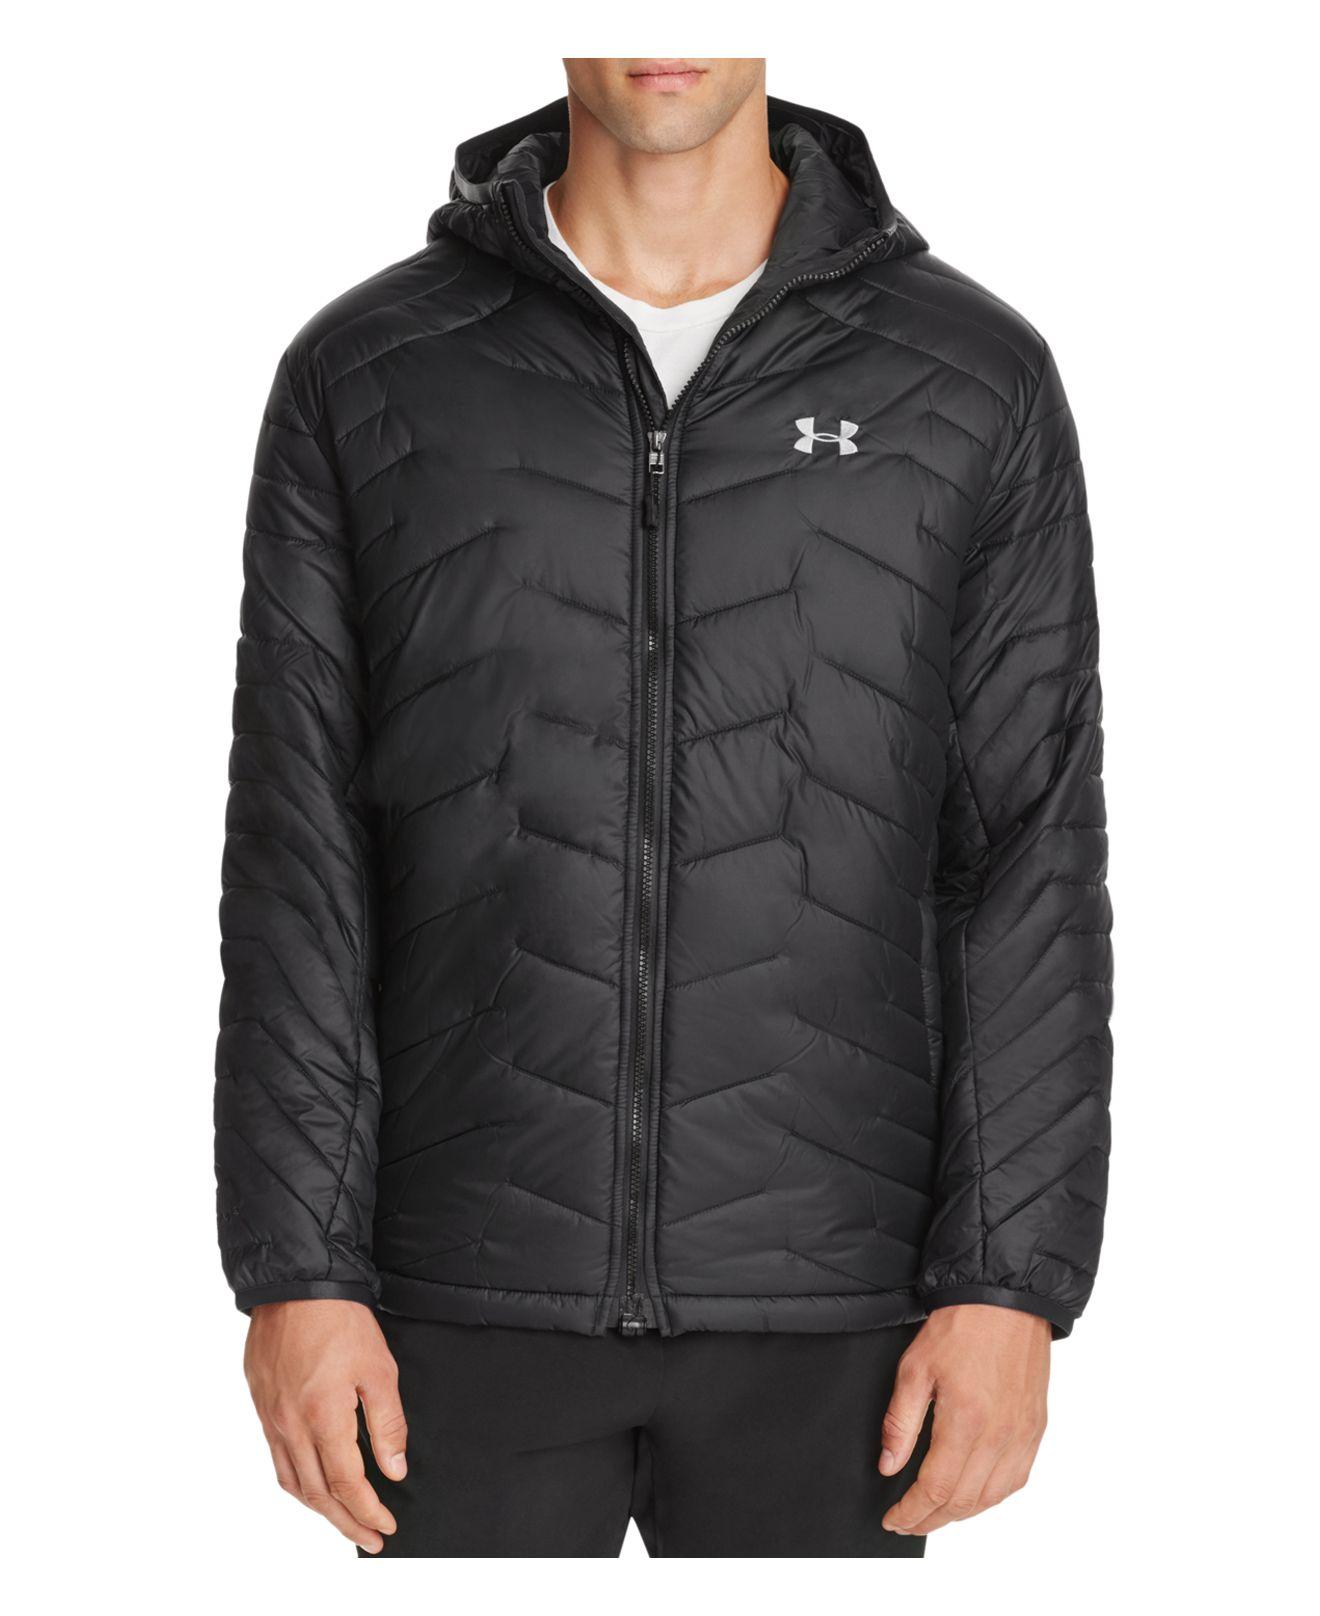 Lyst - Under Armour Cold Gear® Reactor Hooded Jacket in Black for Men